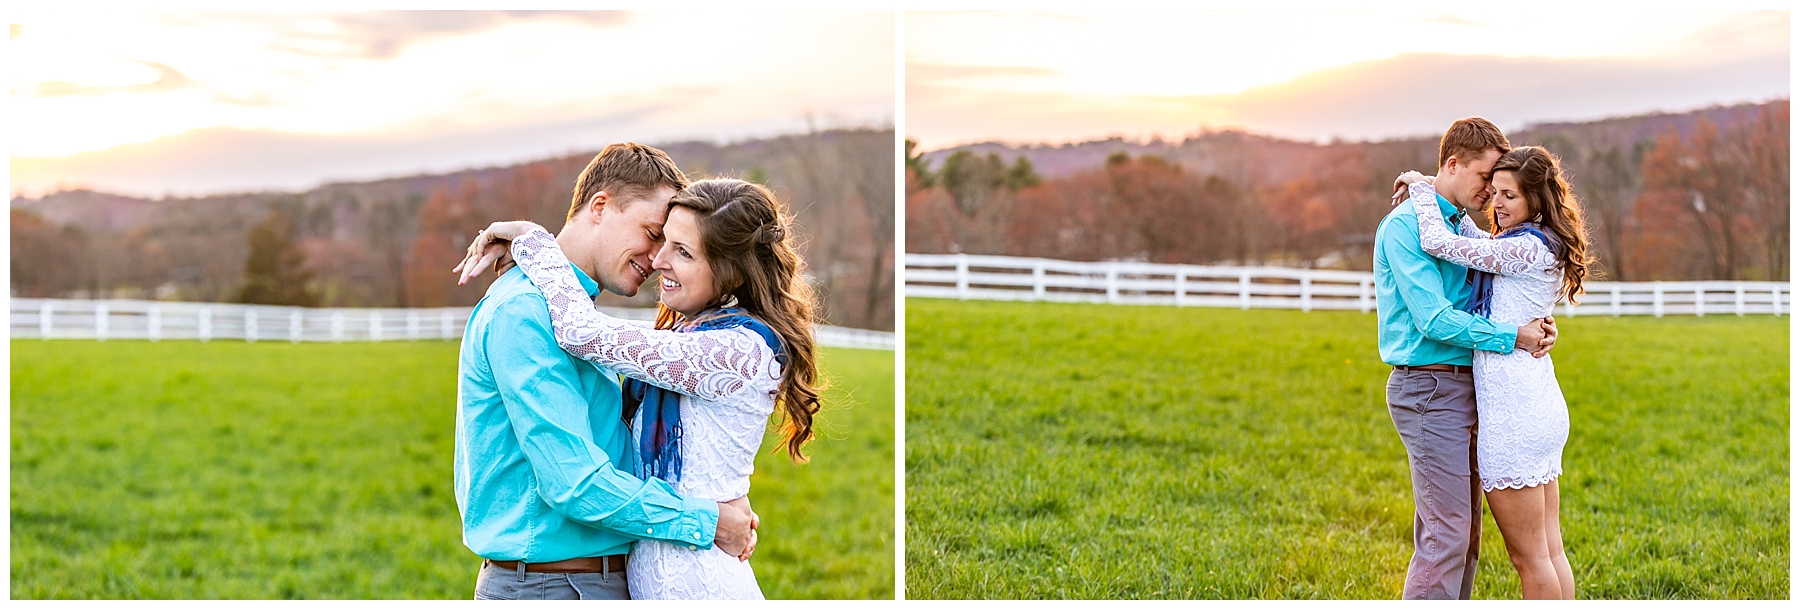 Chelsea Phil Private Estate Engagement Living Radiant Photography photos color_0044.jpg